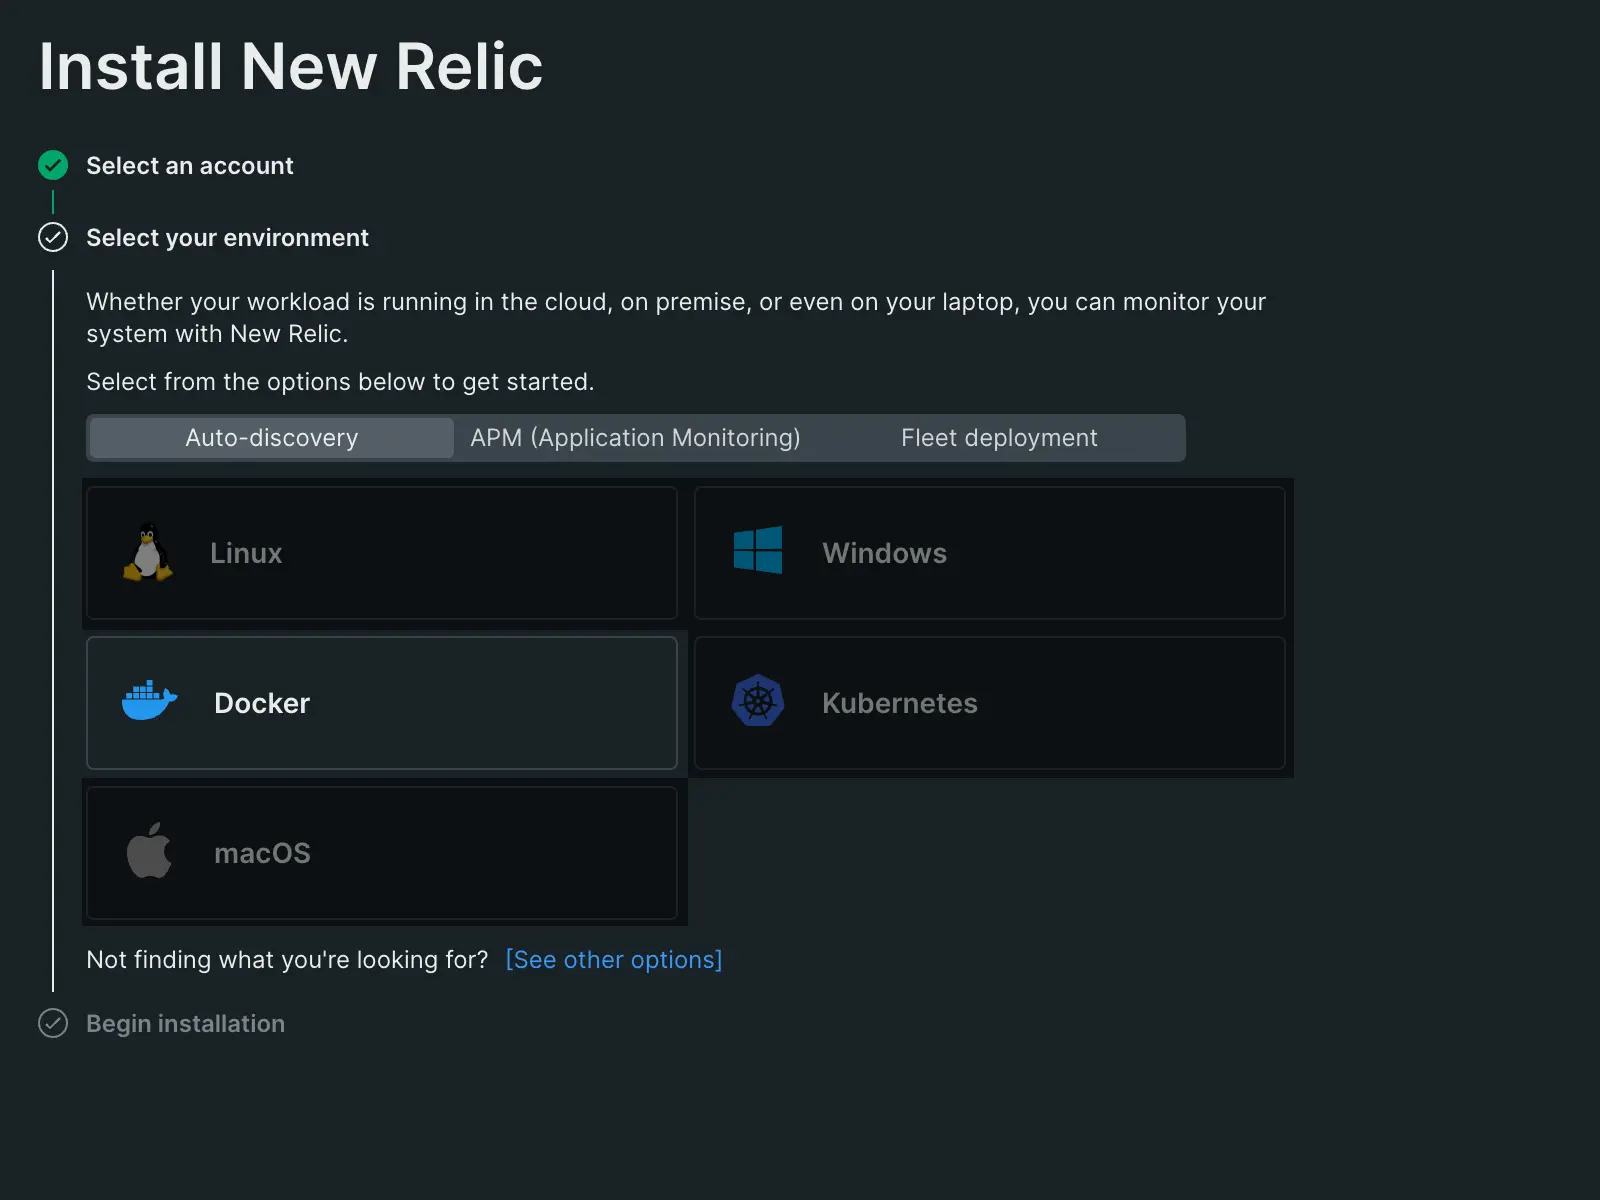 An image displaying New Relic's guided installation for Docker